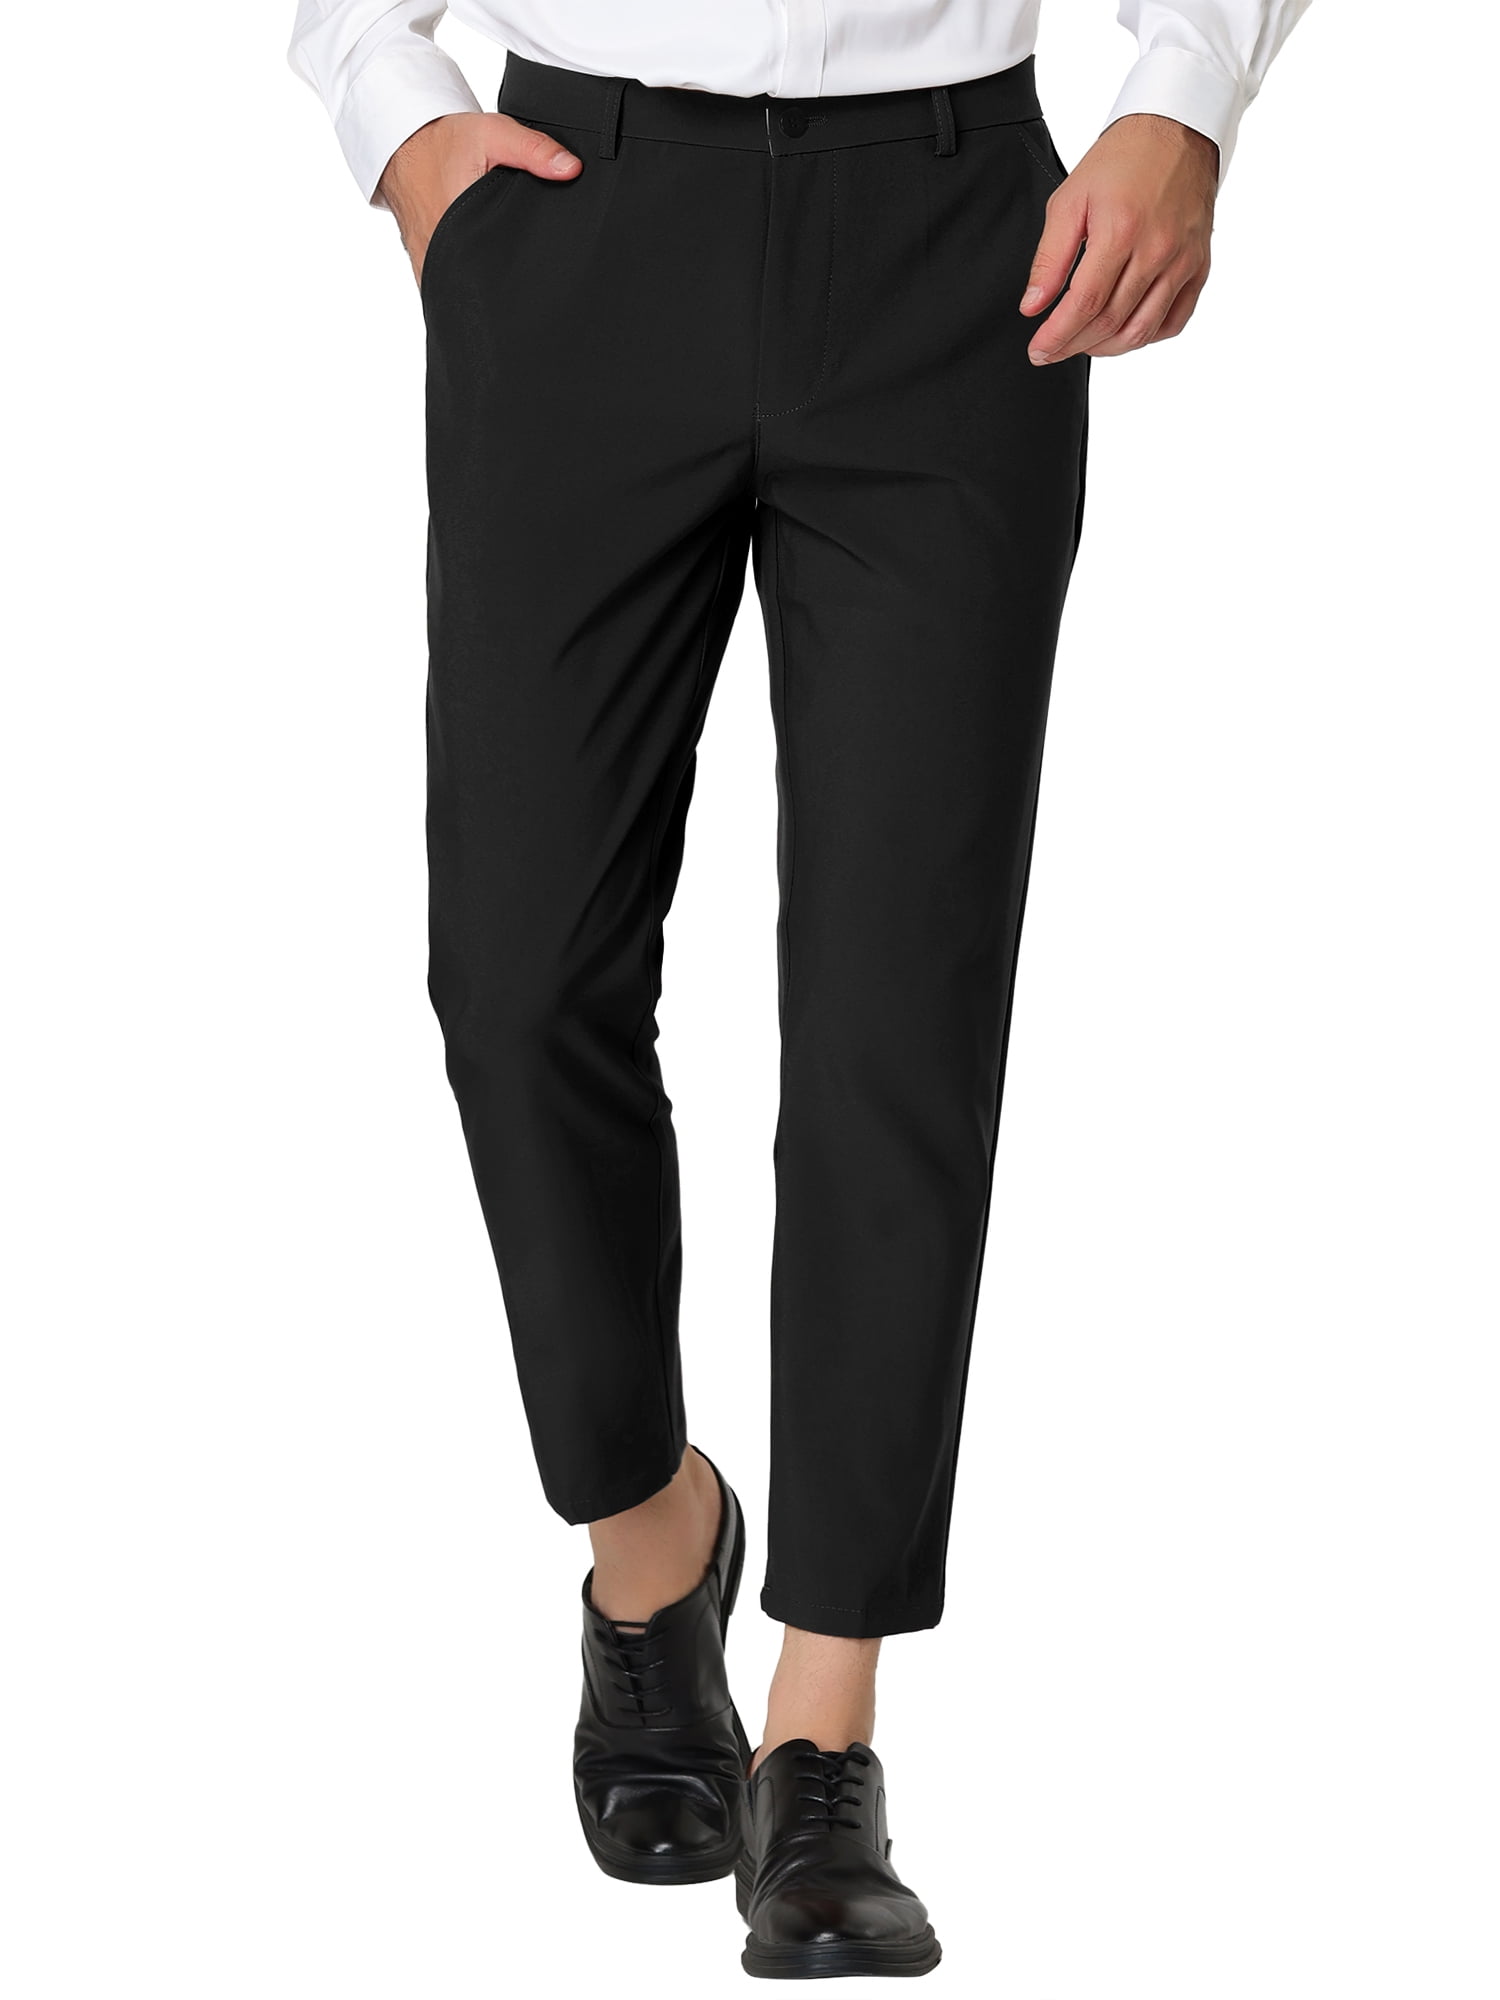 Details 82+ slim fit ankle length trousers - in.cdgdbentre